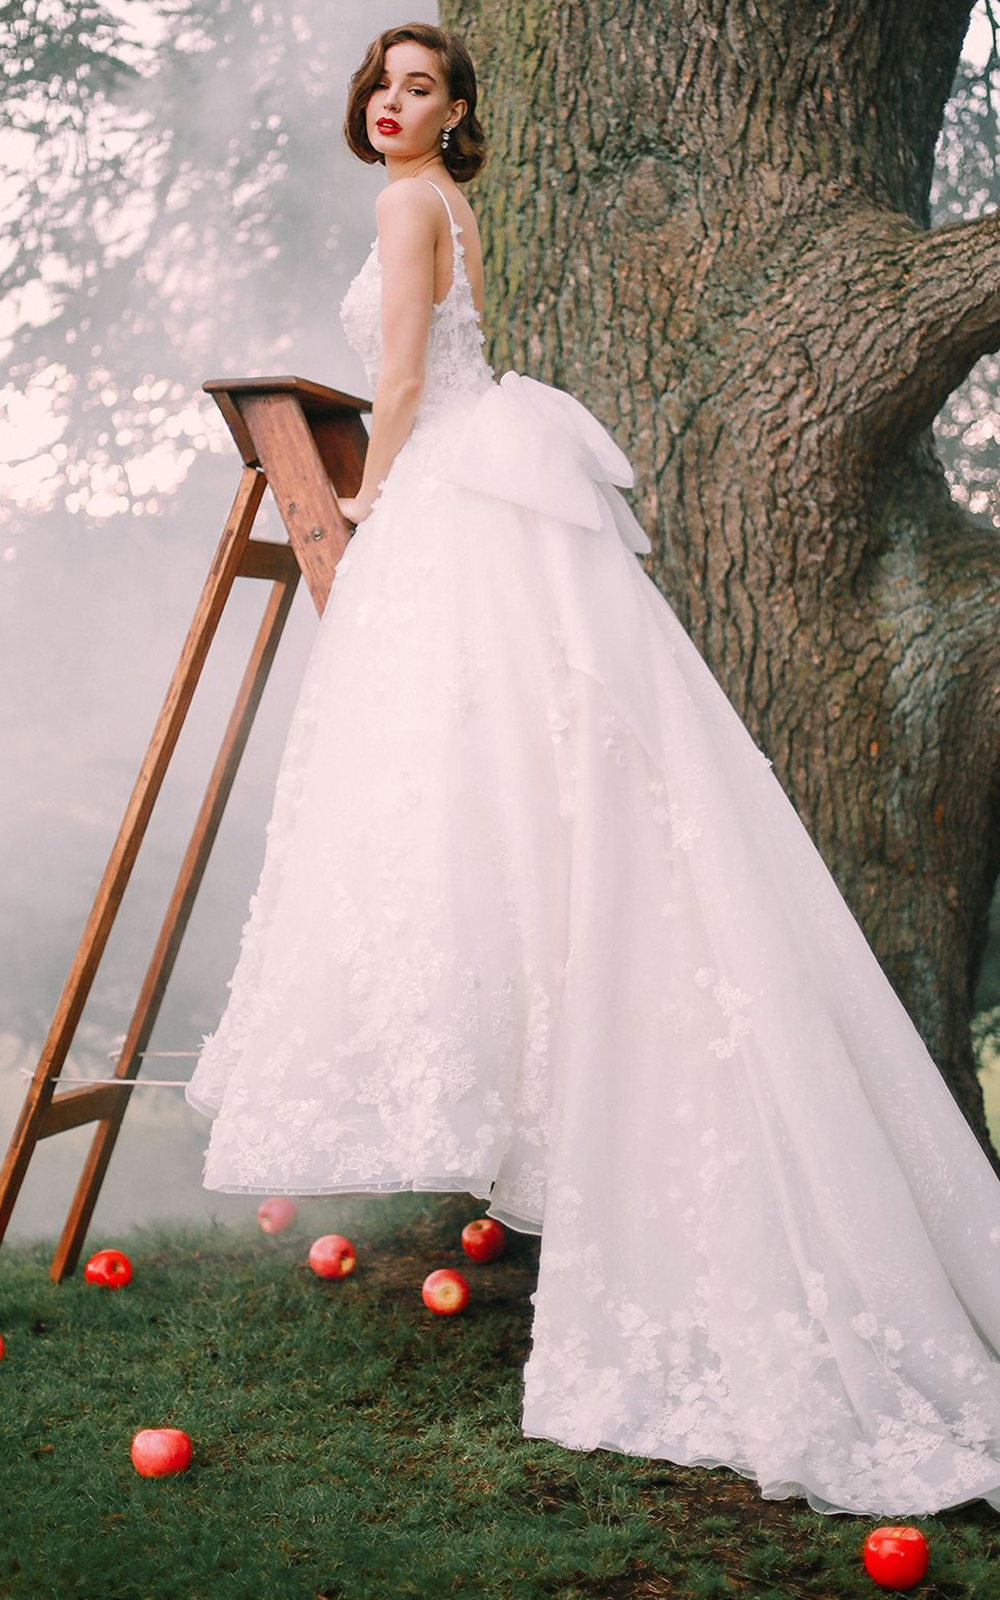 Disney Wedding Dress Collection is for the Princess in All of Us